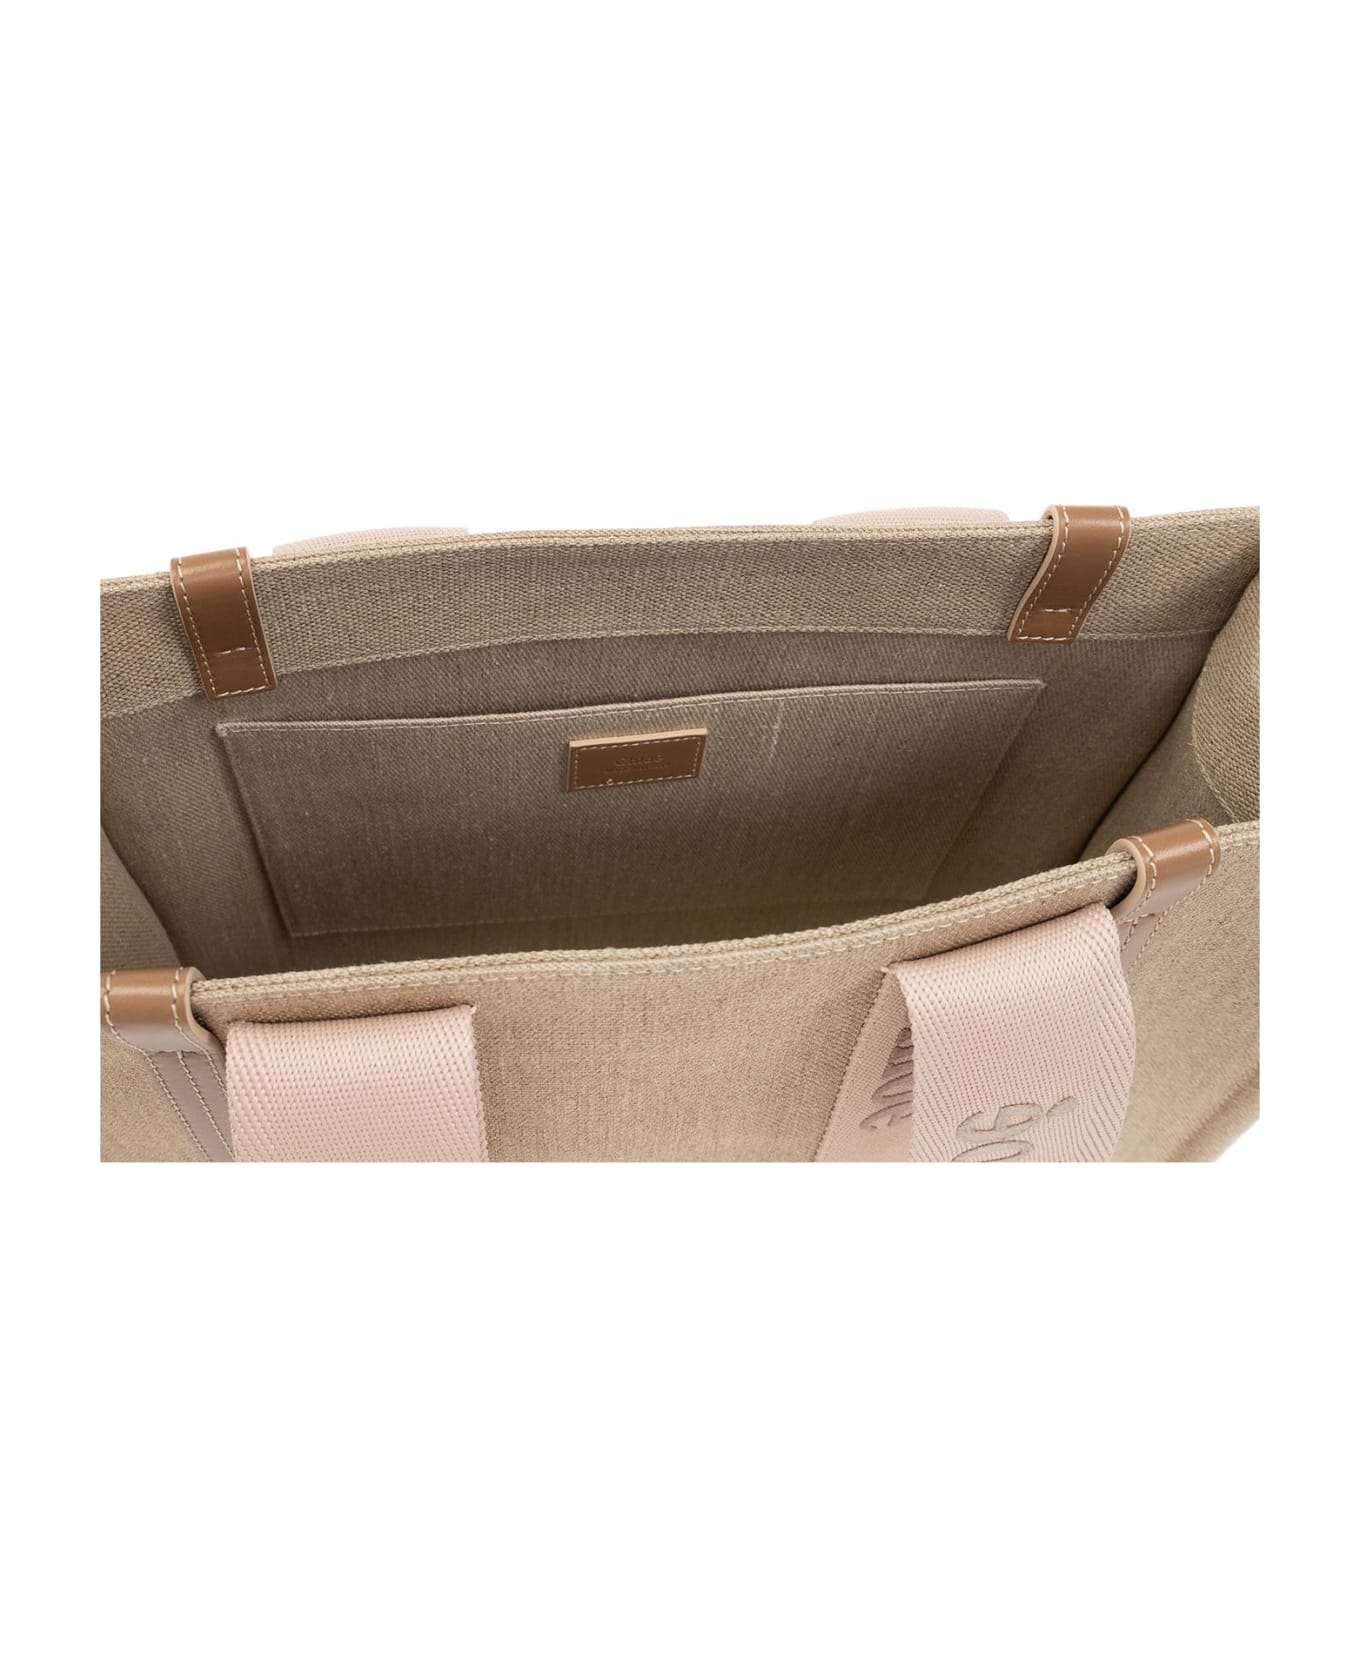 Chloé Pink And Beige Woody Medium Shopping Bag With Shoulder Strap - Beige トートバッグ